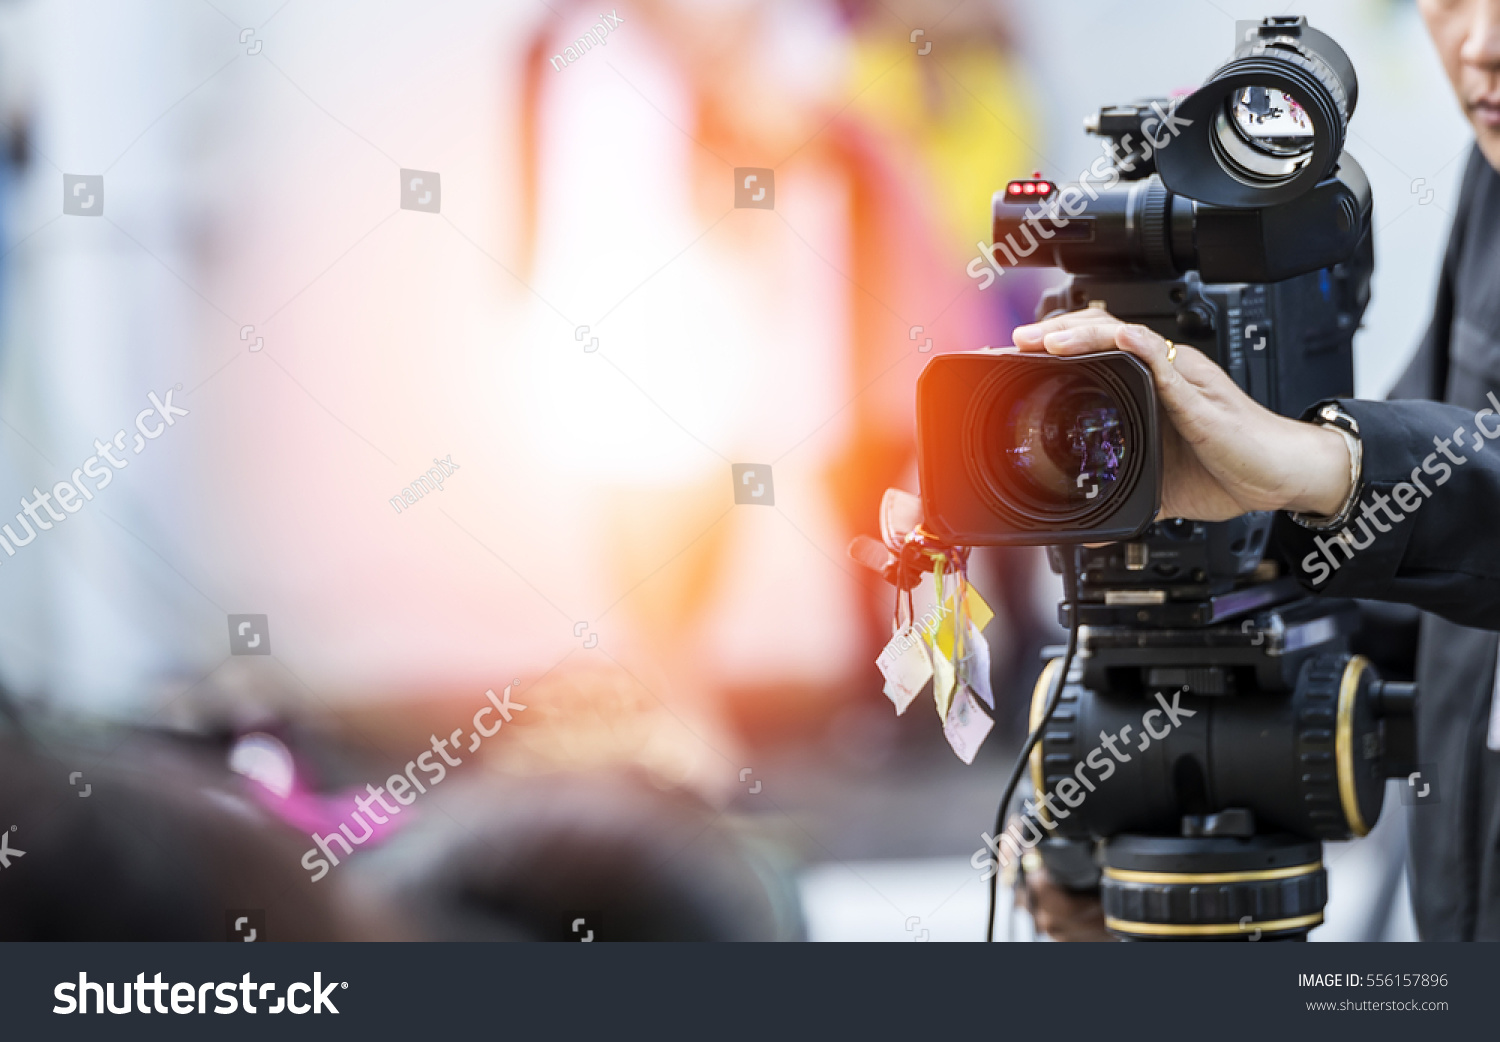 Video camera operator working with his equipment #556157896